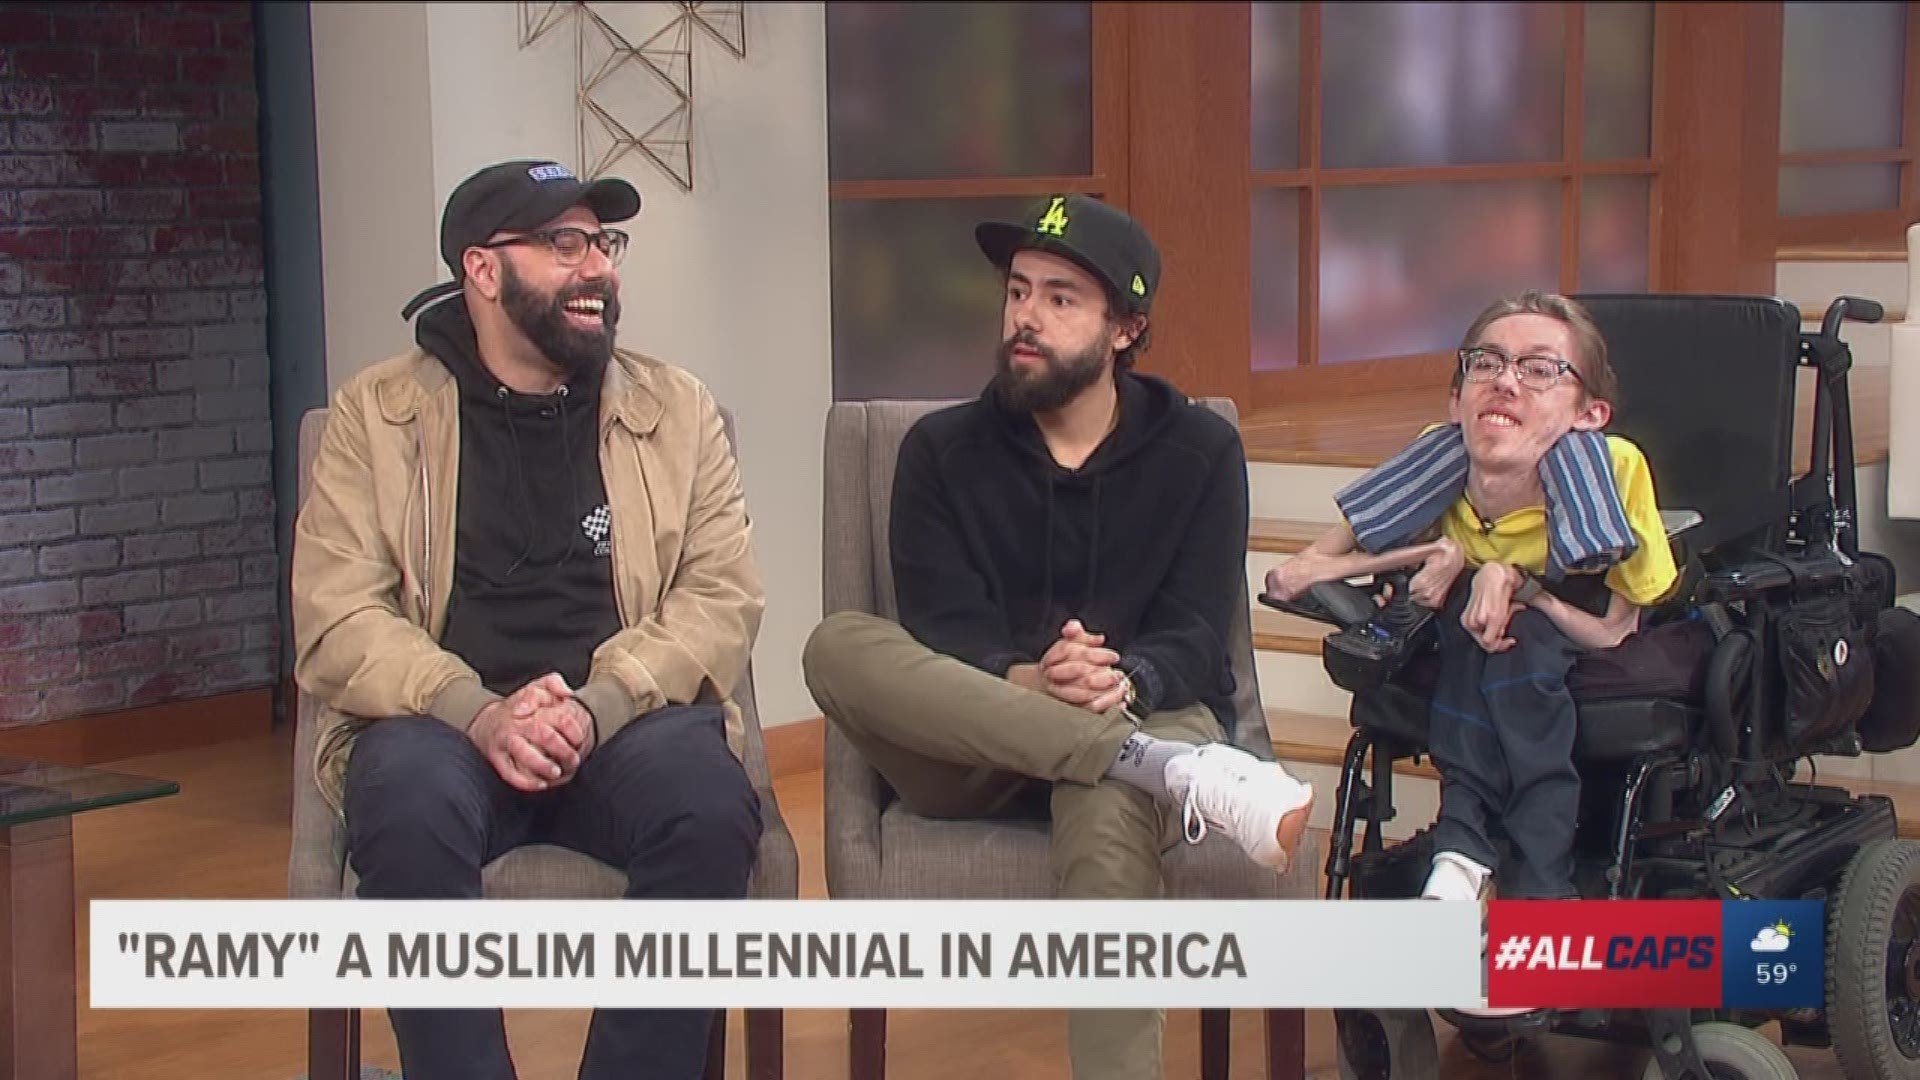 Ramy Youseff, comedian and star of the new Hulu series "Ramy", joins us on Great Day Washington with his real life best friends and fellow "Ramy" castmates Steve Way and Dave Merheje.